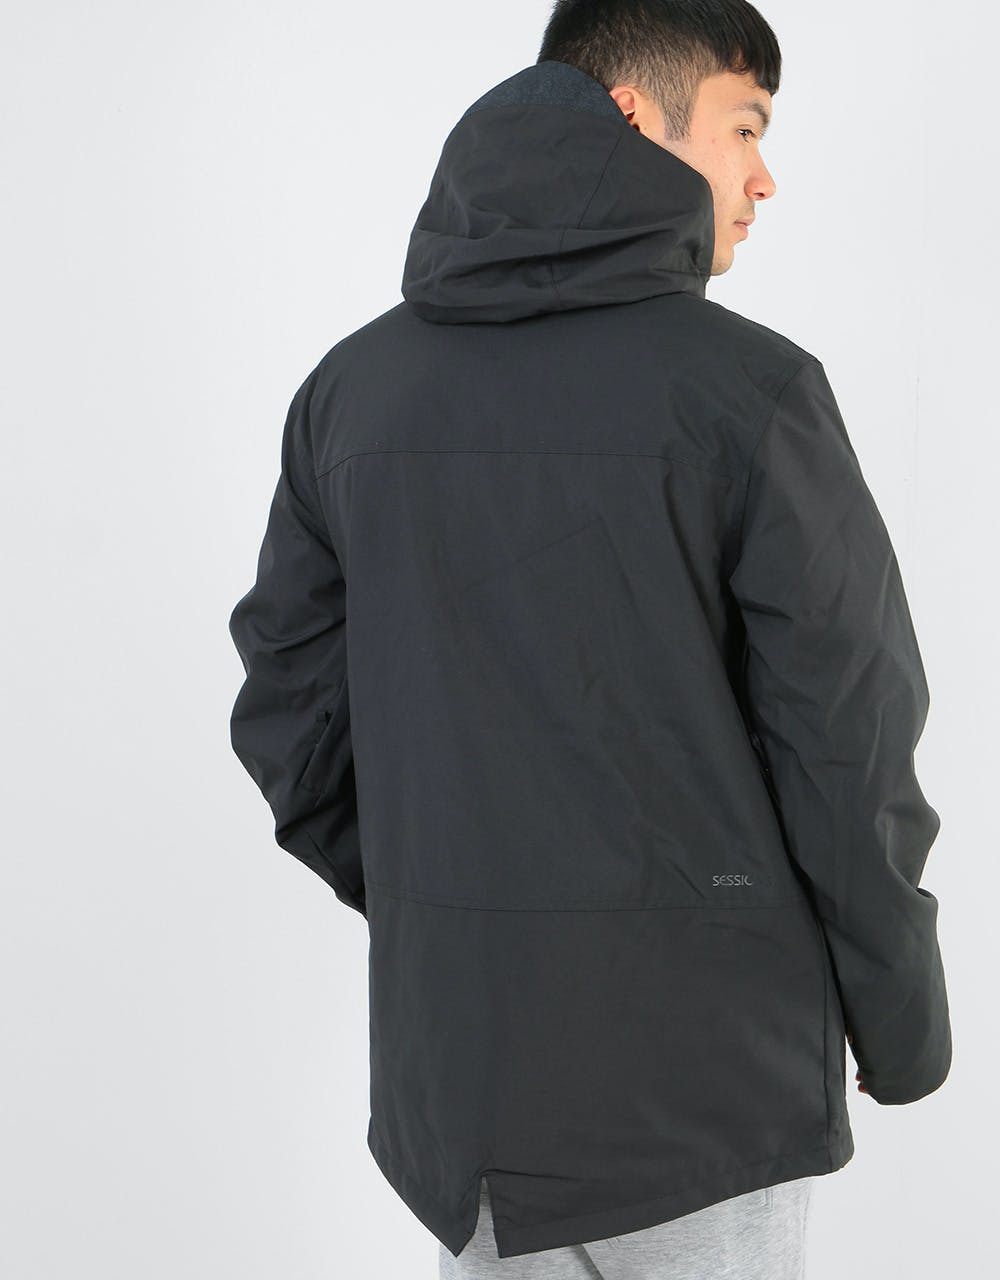 Sessions Scout Snowboard Jacket - Black